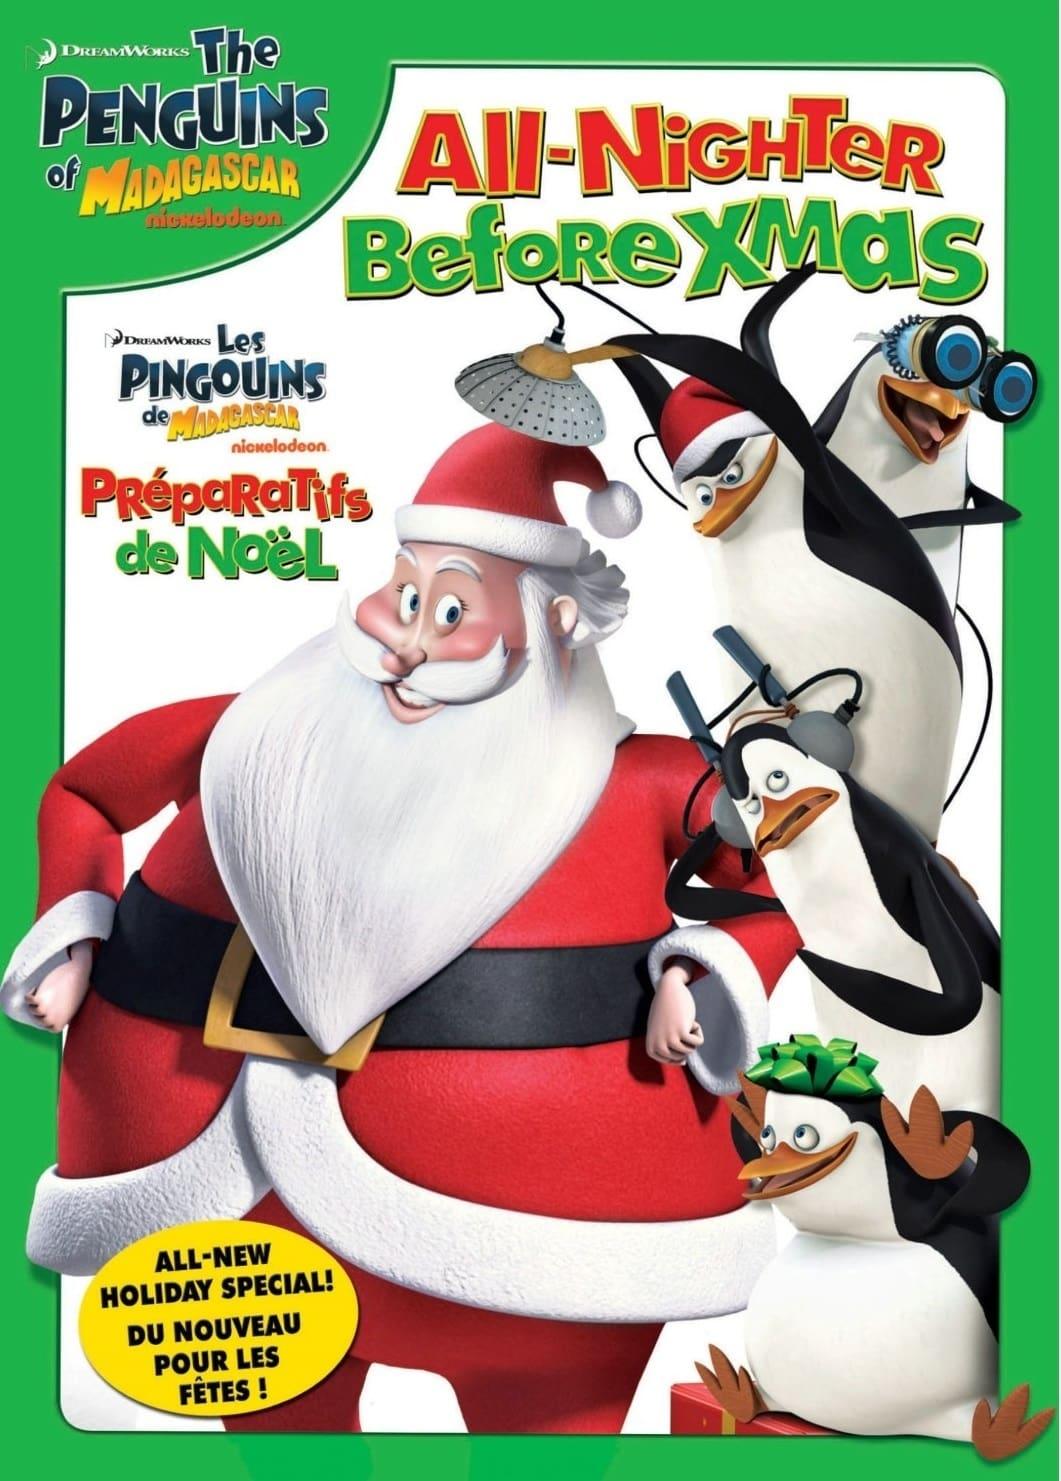 The Penguins of Madagascar: The All-Nighter Before Xmas poster